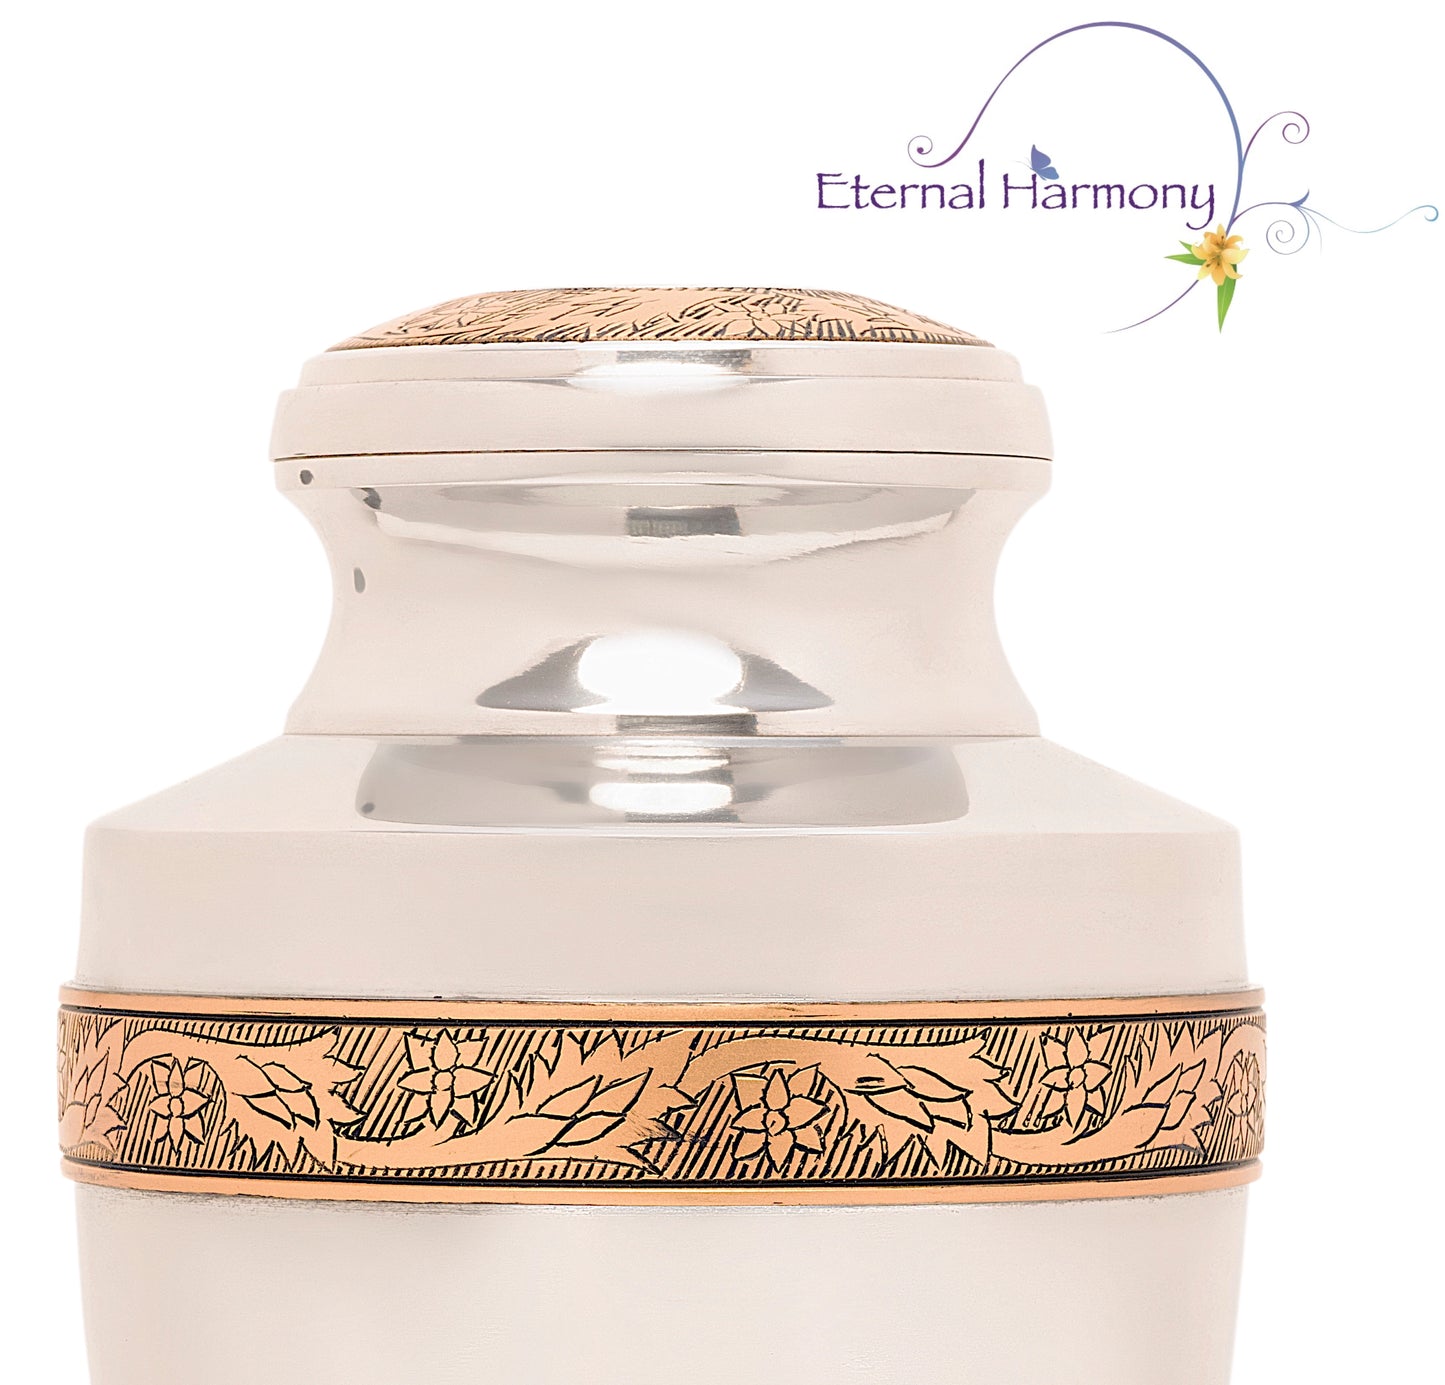 Adult Urn in Eternity Silver Gold